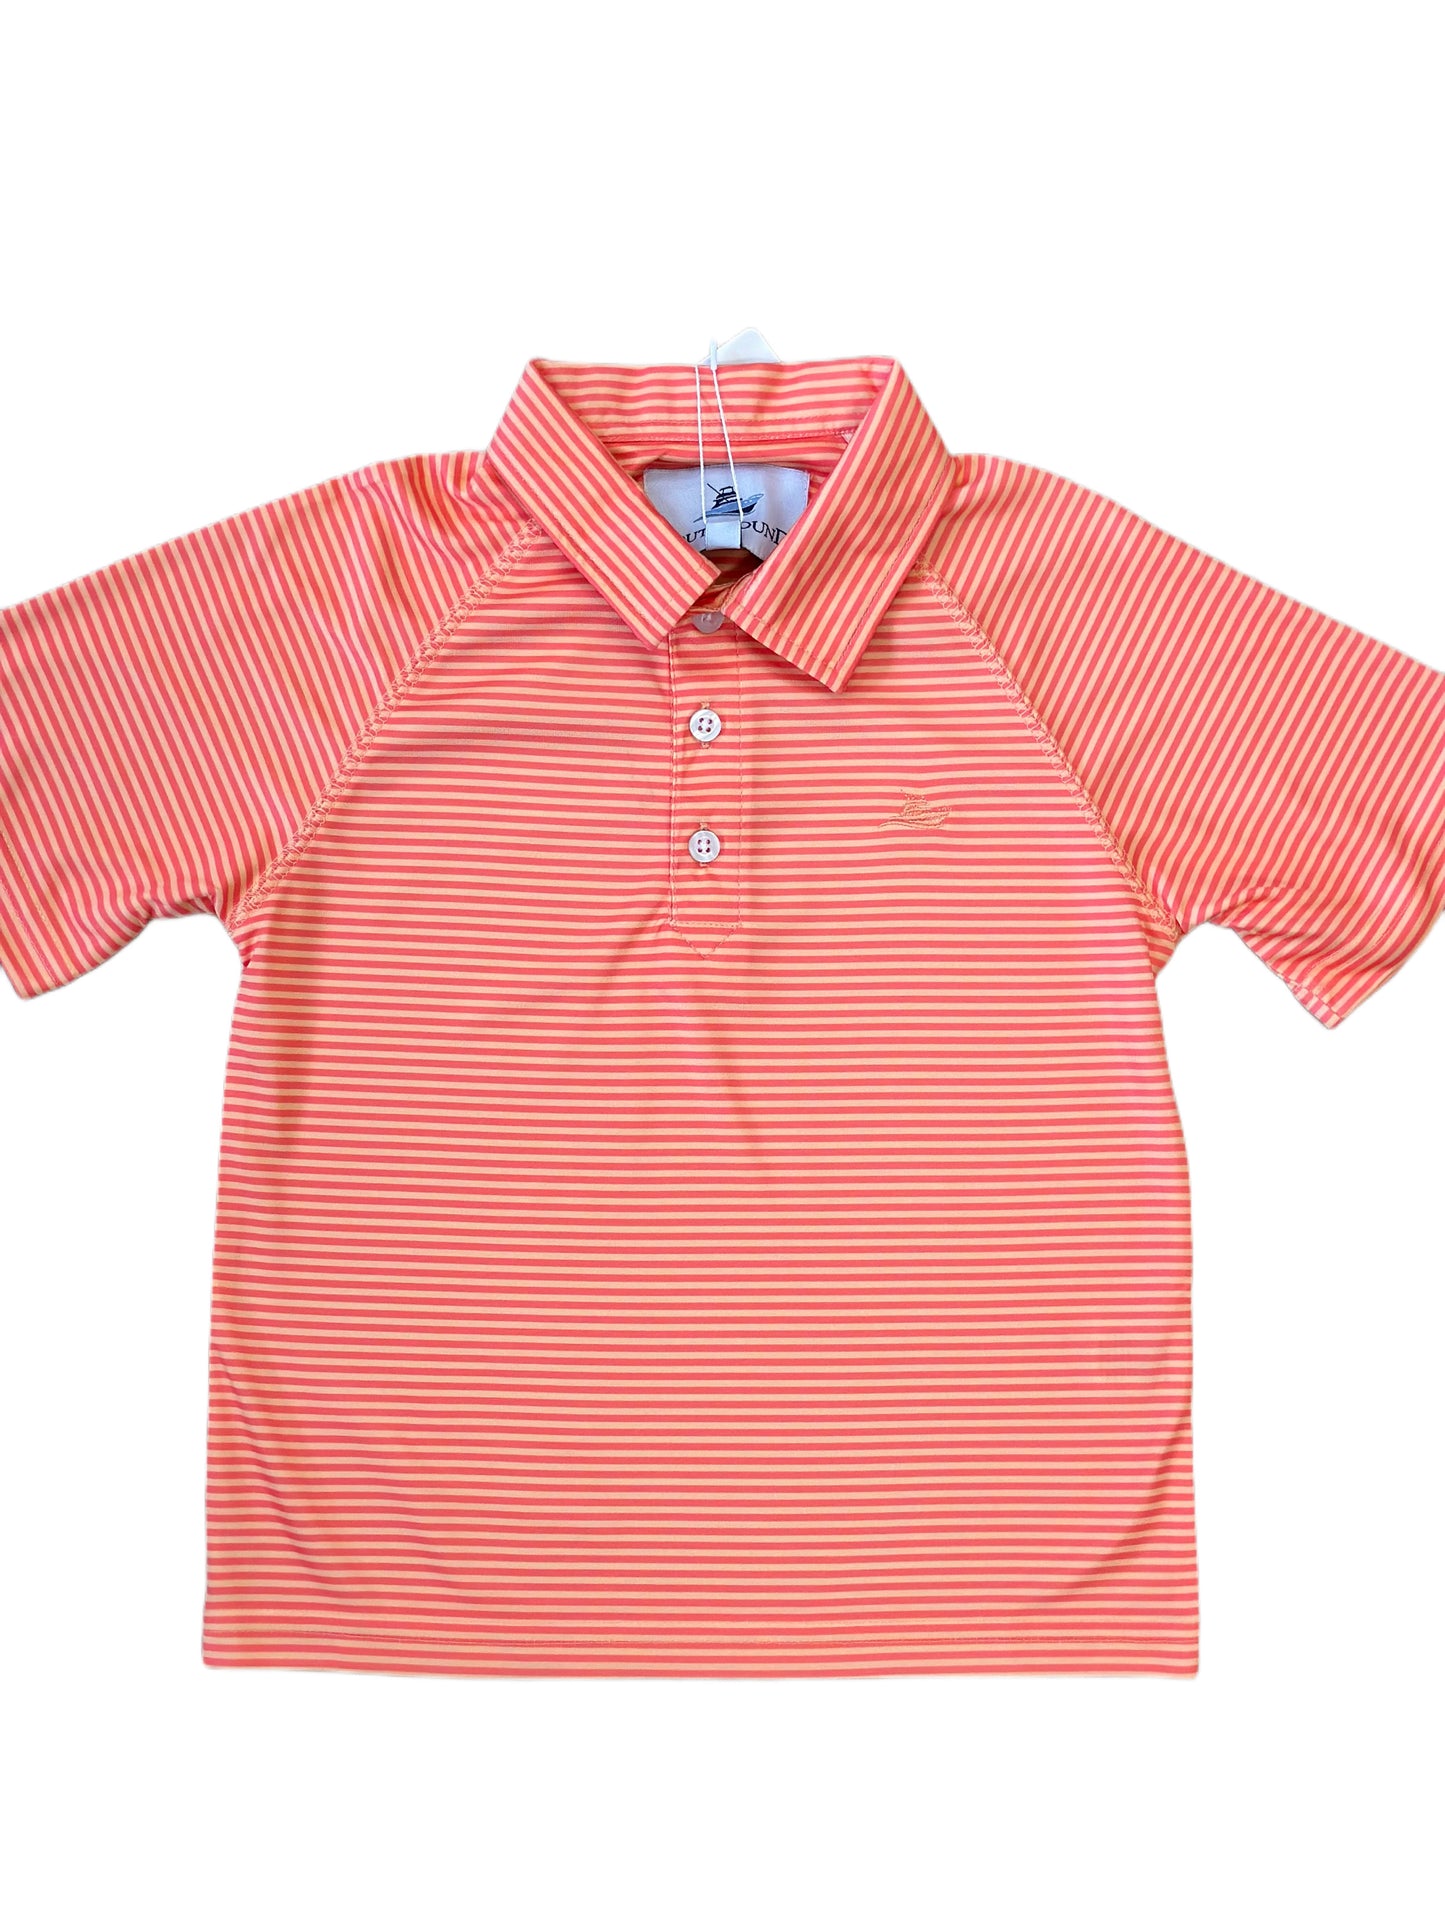 Southbound Performance Polo, Coral